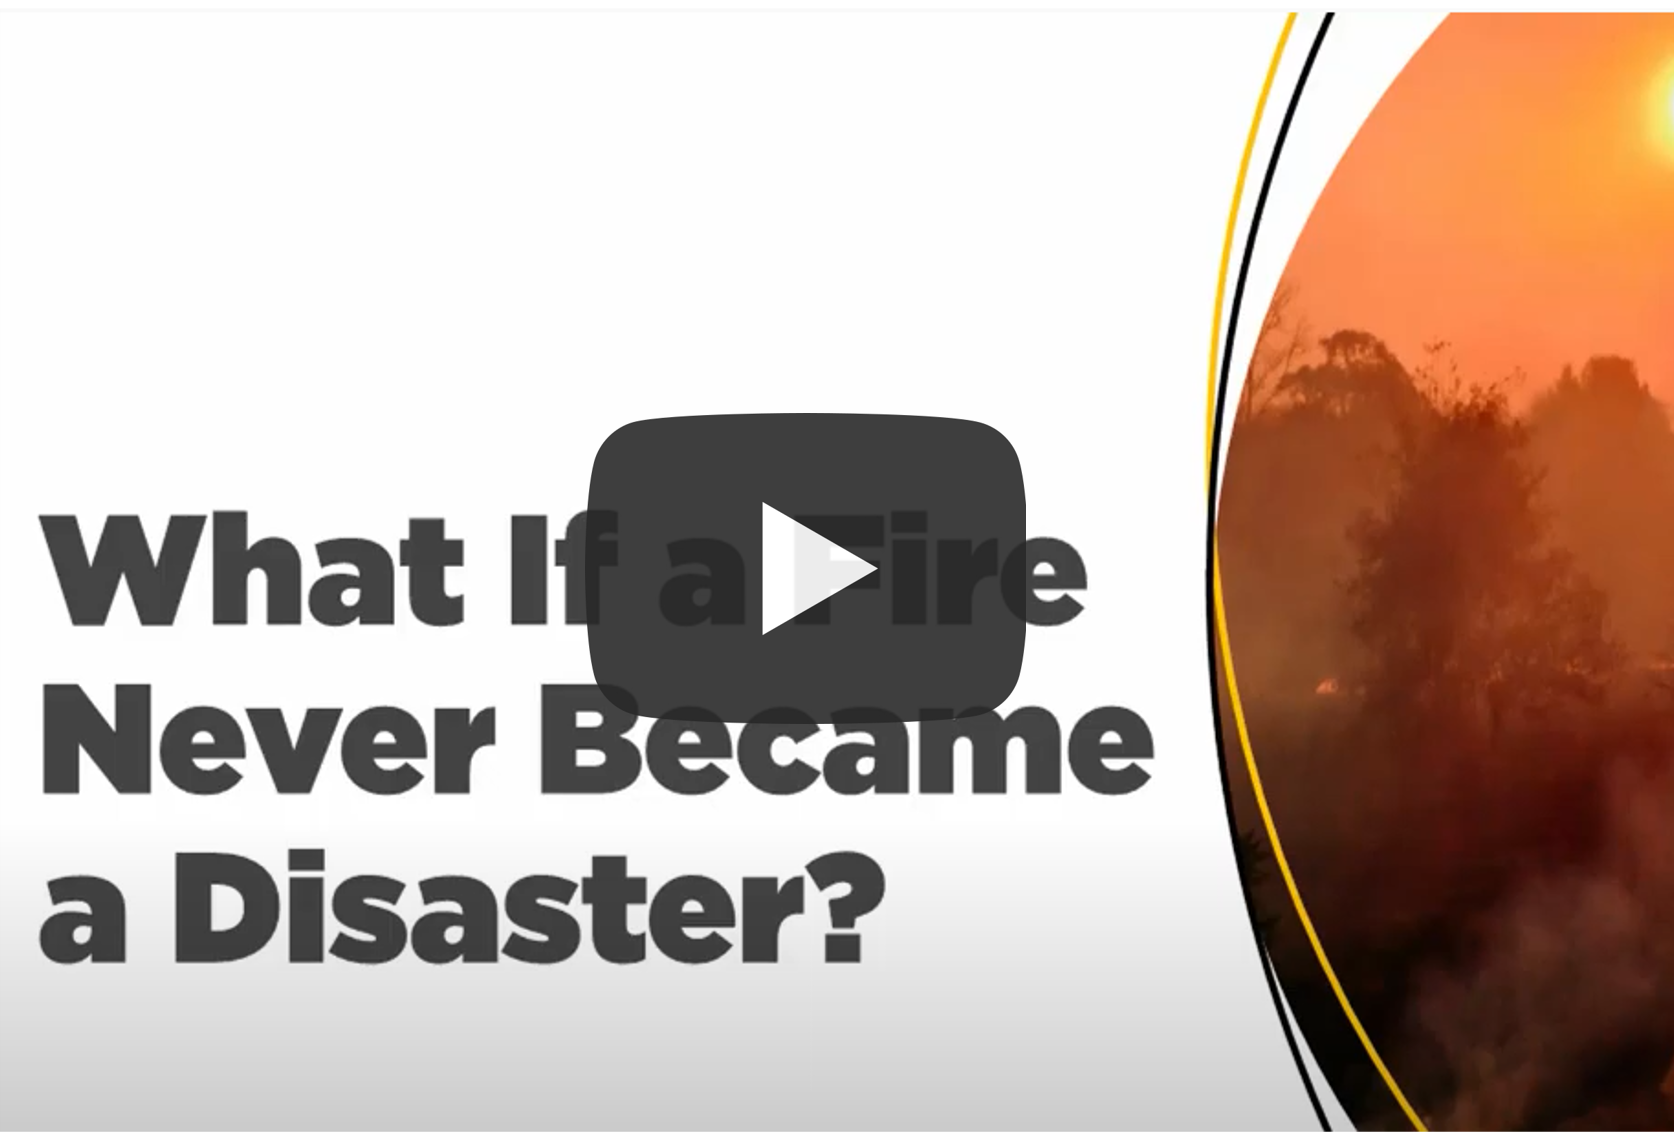 What if Fire Never Became a Disaster Video